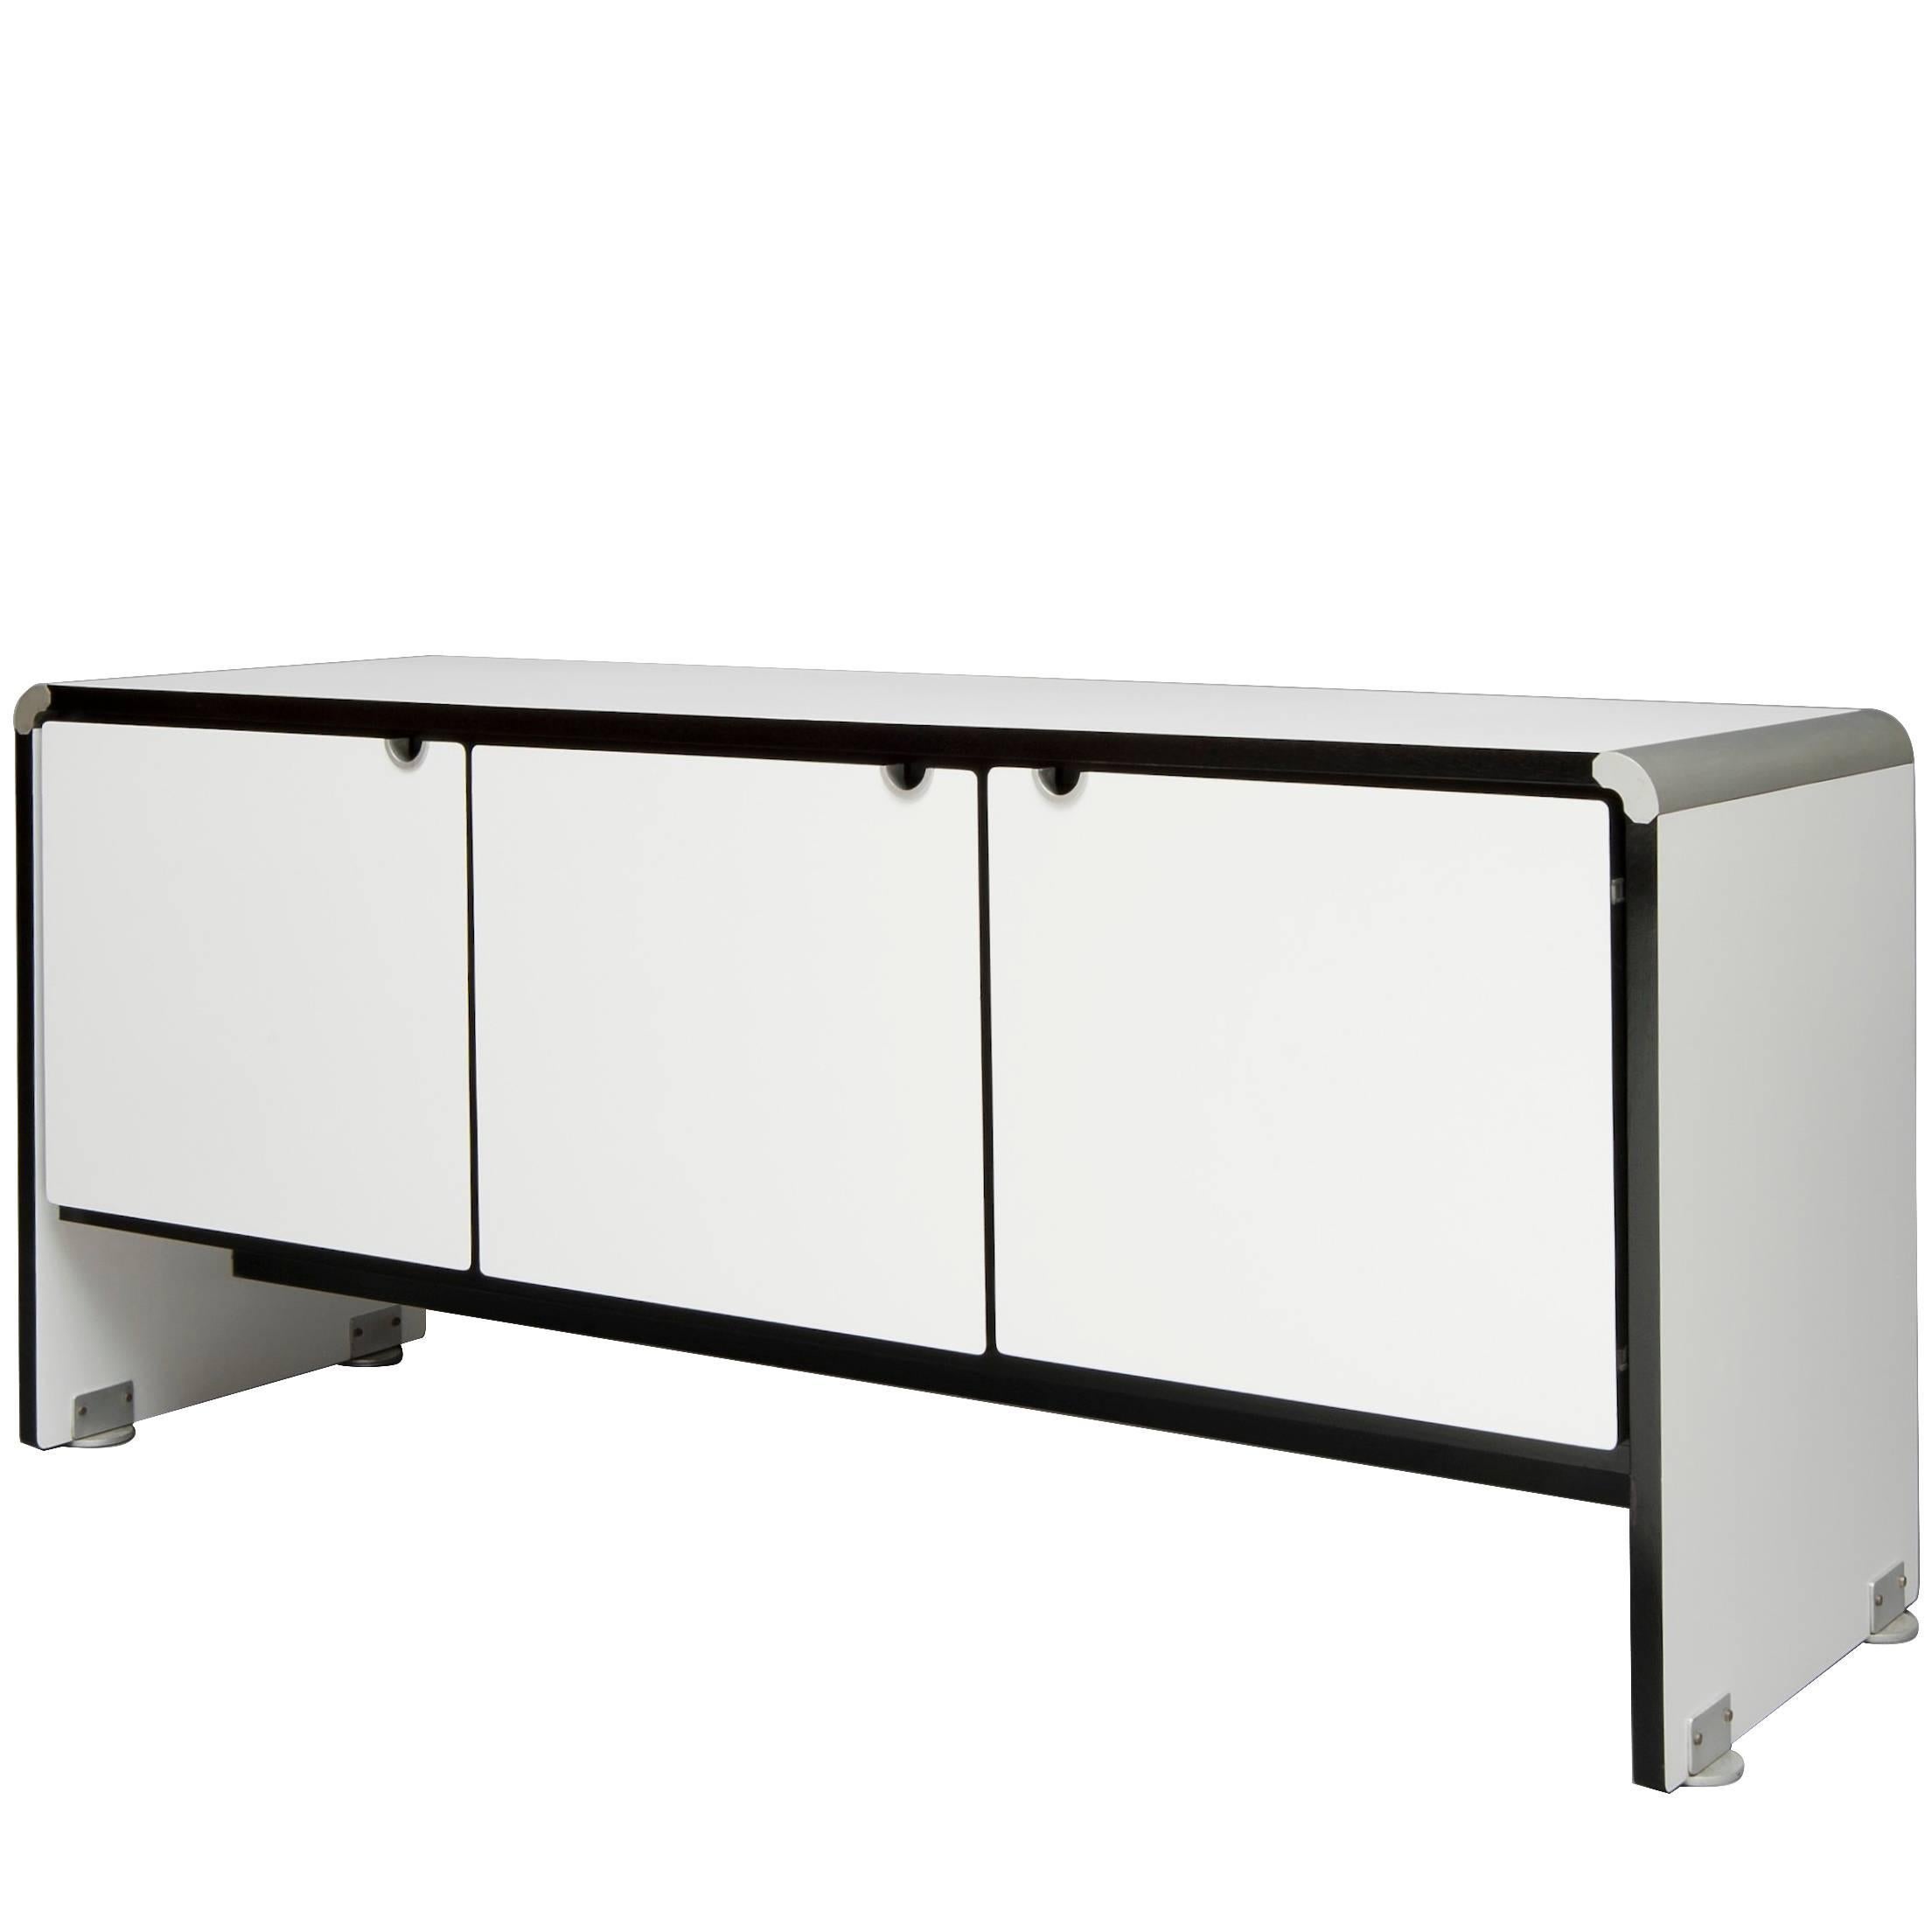 Sideboard AR 715 by Alain Richard  - TFM Mobilier National edition - 1974 For Sale